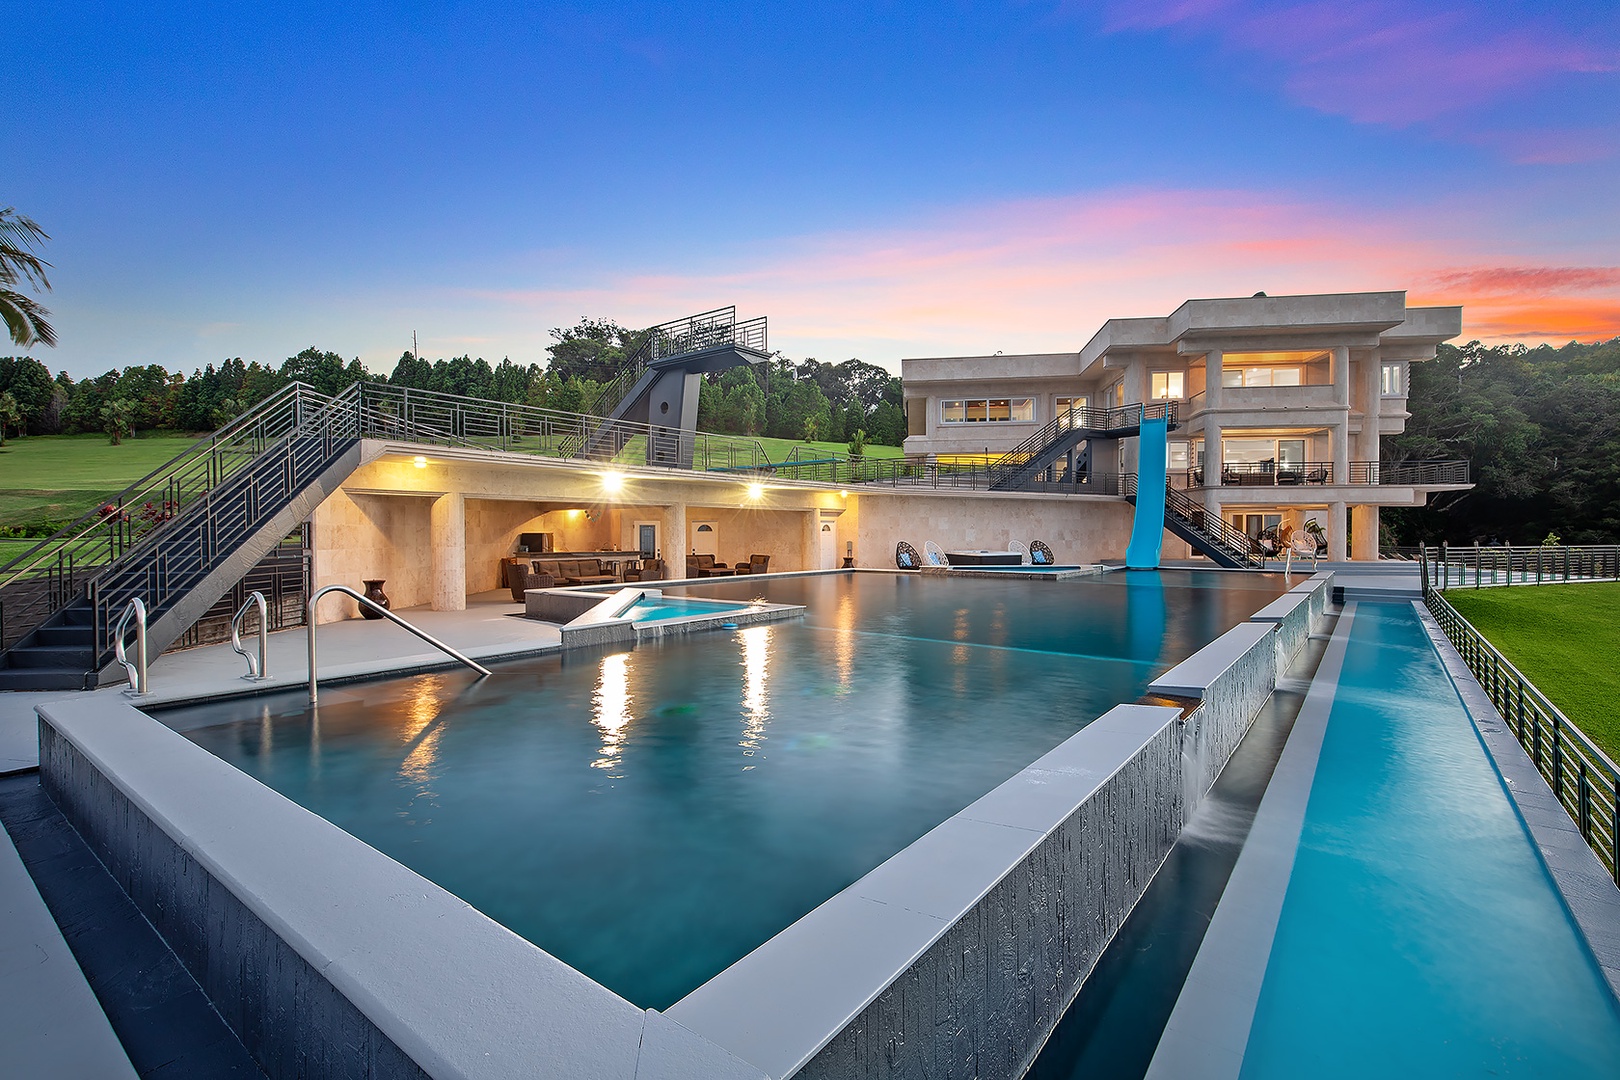 Ninole Vacation Rentals, Waterfalling Estate - Private pool & above-ground spa at sunset.